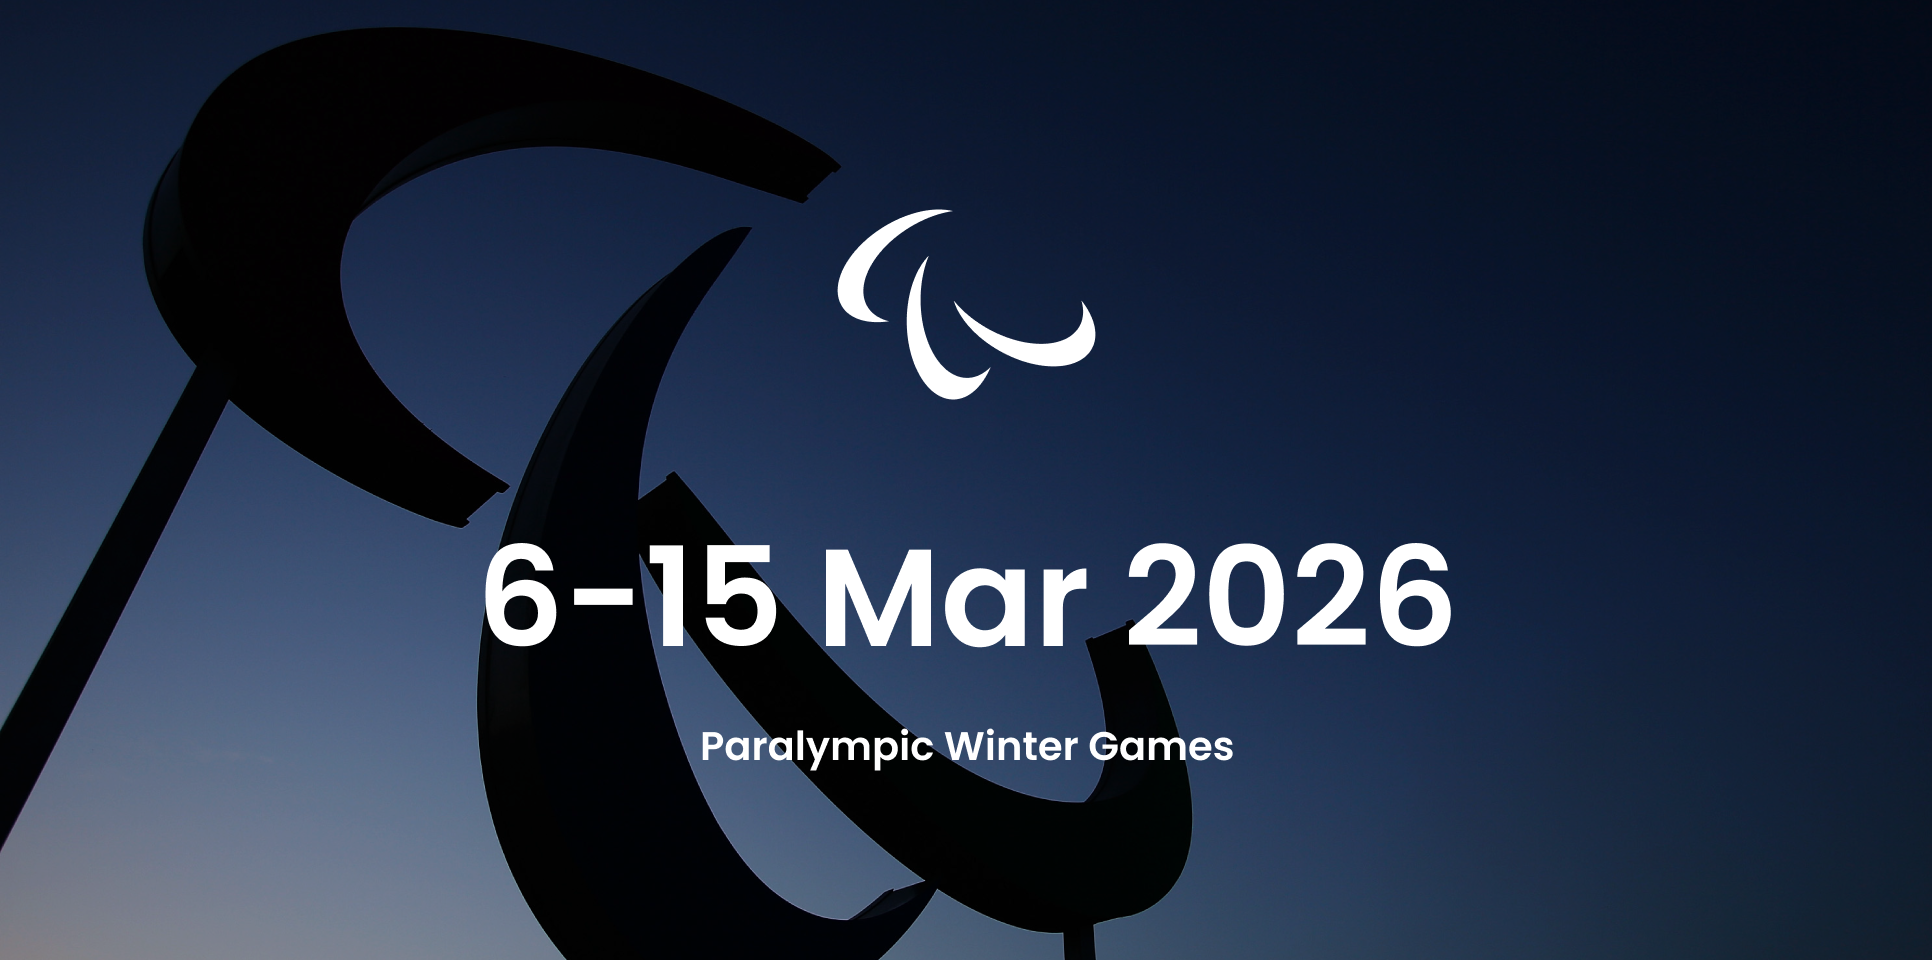 Image with dates for the start and end of the Winter Paralympics Games: 6-15 March 2026